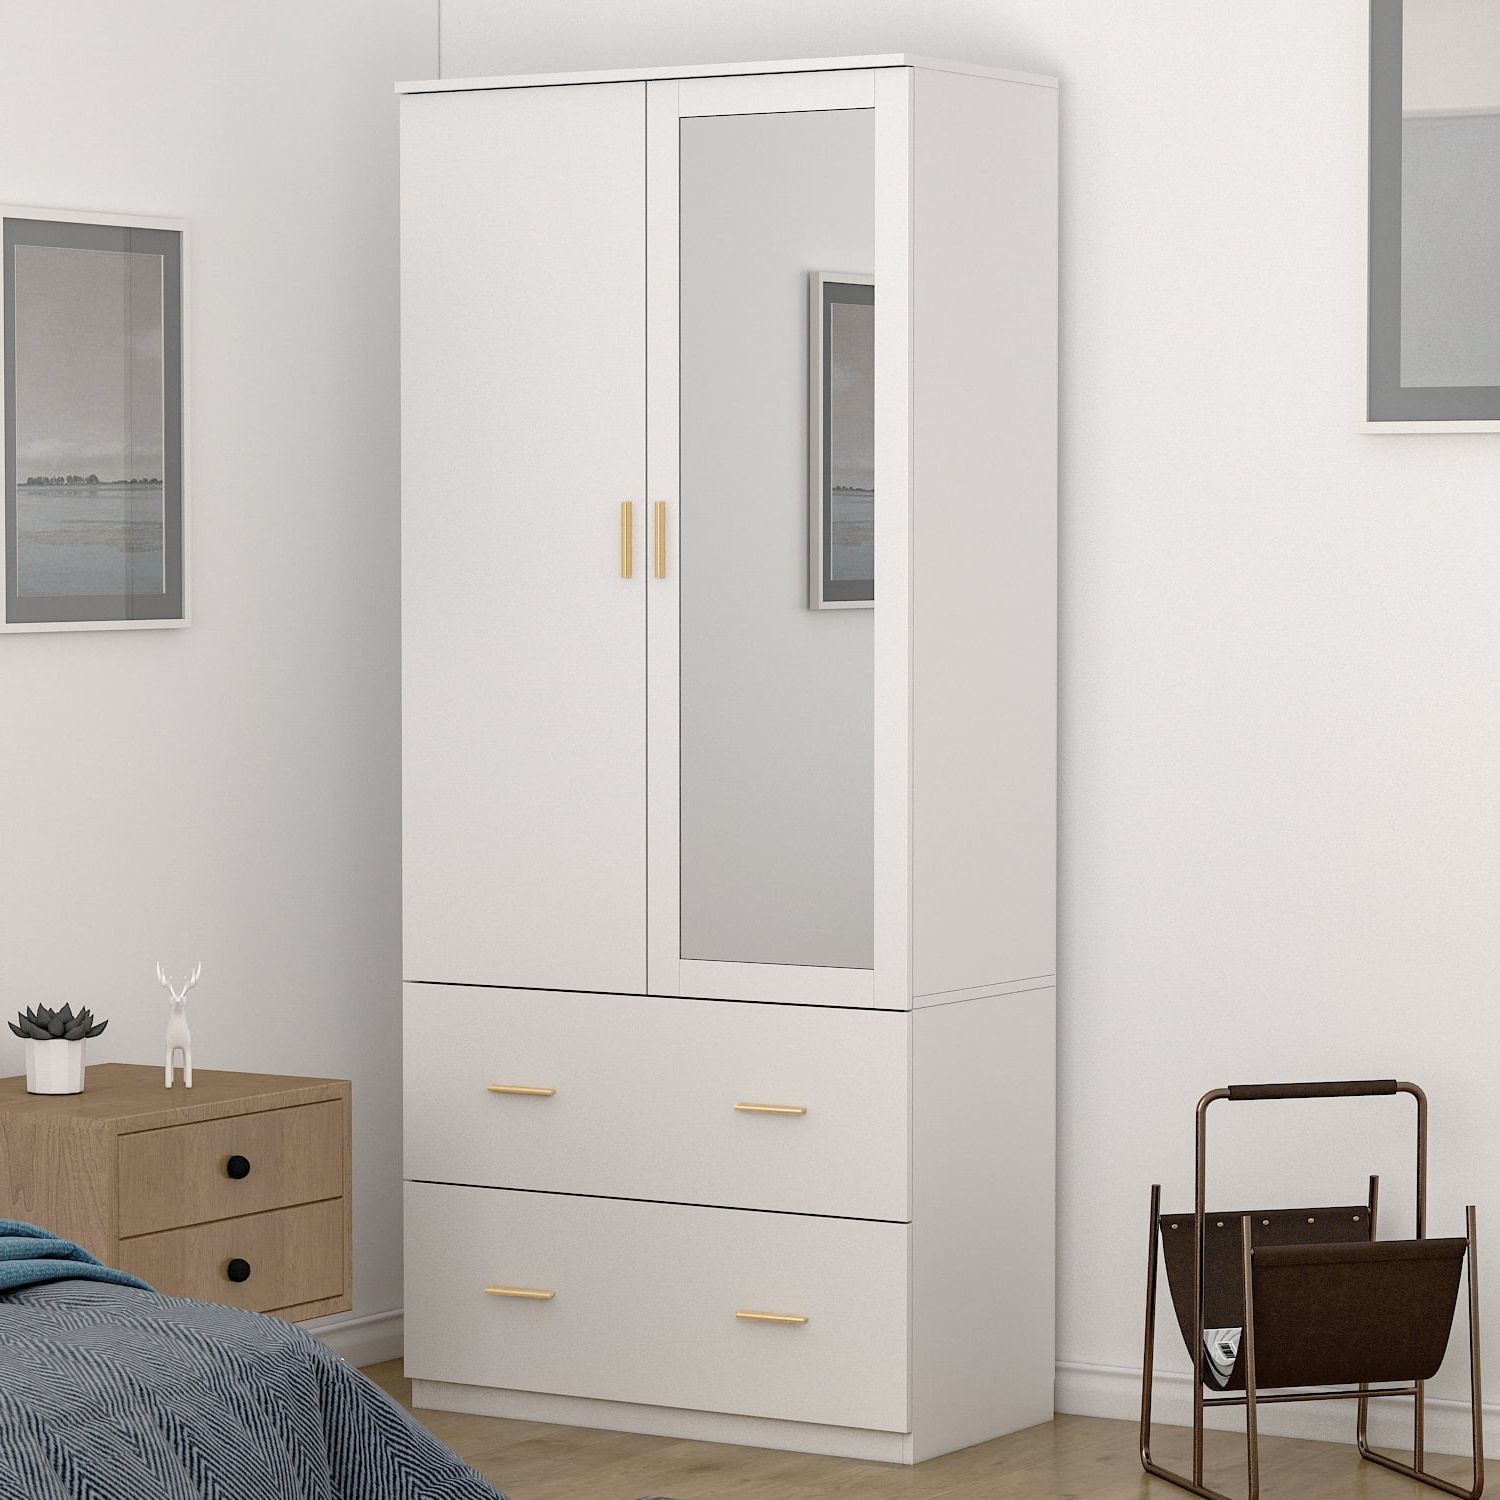 Didugo Armoire Wardrobe Closet With Mirror Doors And Hanging Rod For  Bedroom White – Walmart For Single White Wardrobes With Mirror (Gallery 15 of 20)